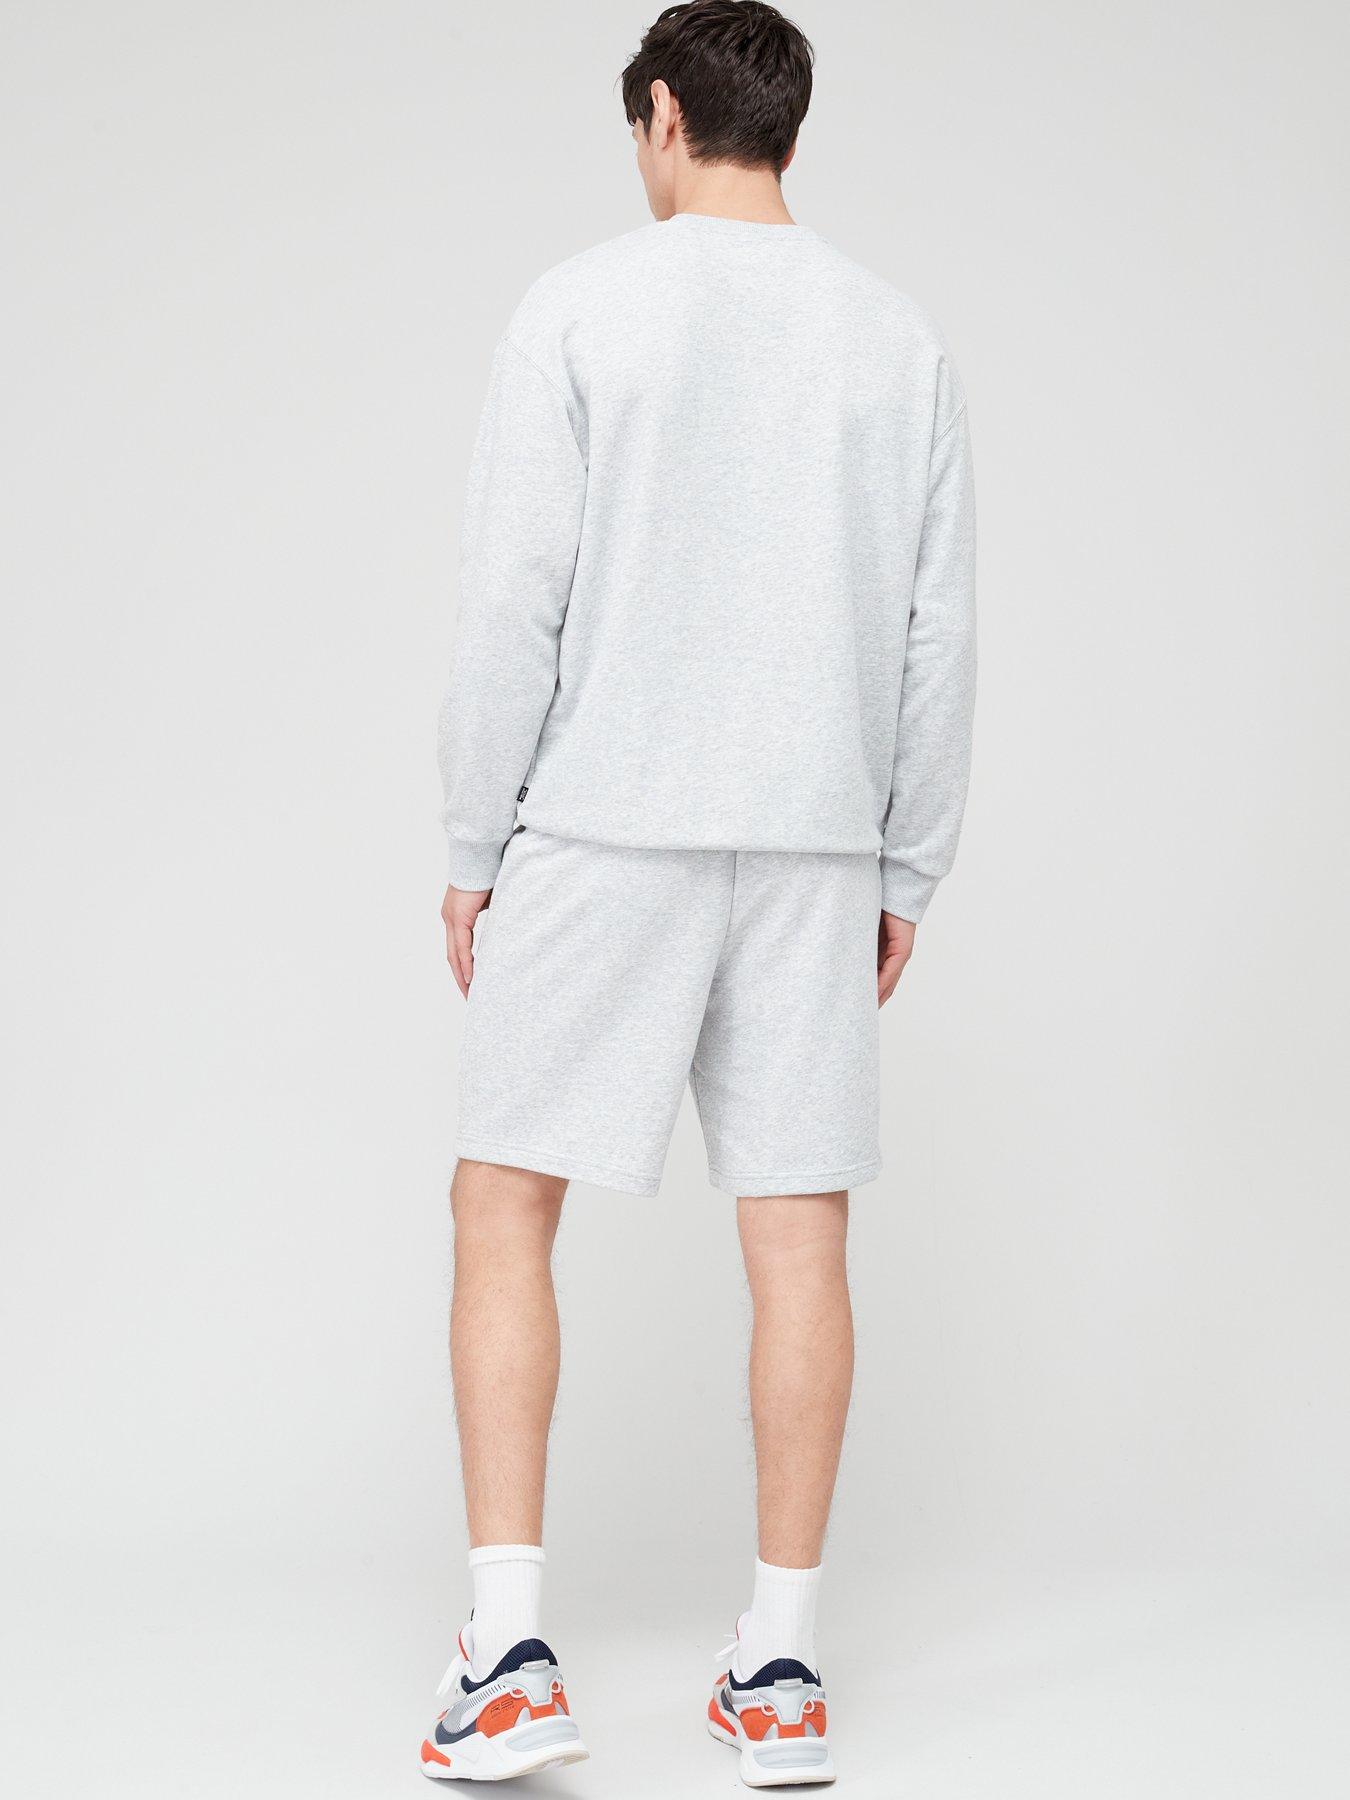 Puma Mens Relaxed Sweat Suit - Light Grey | Very.co.uk